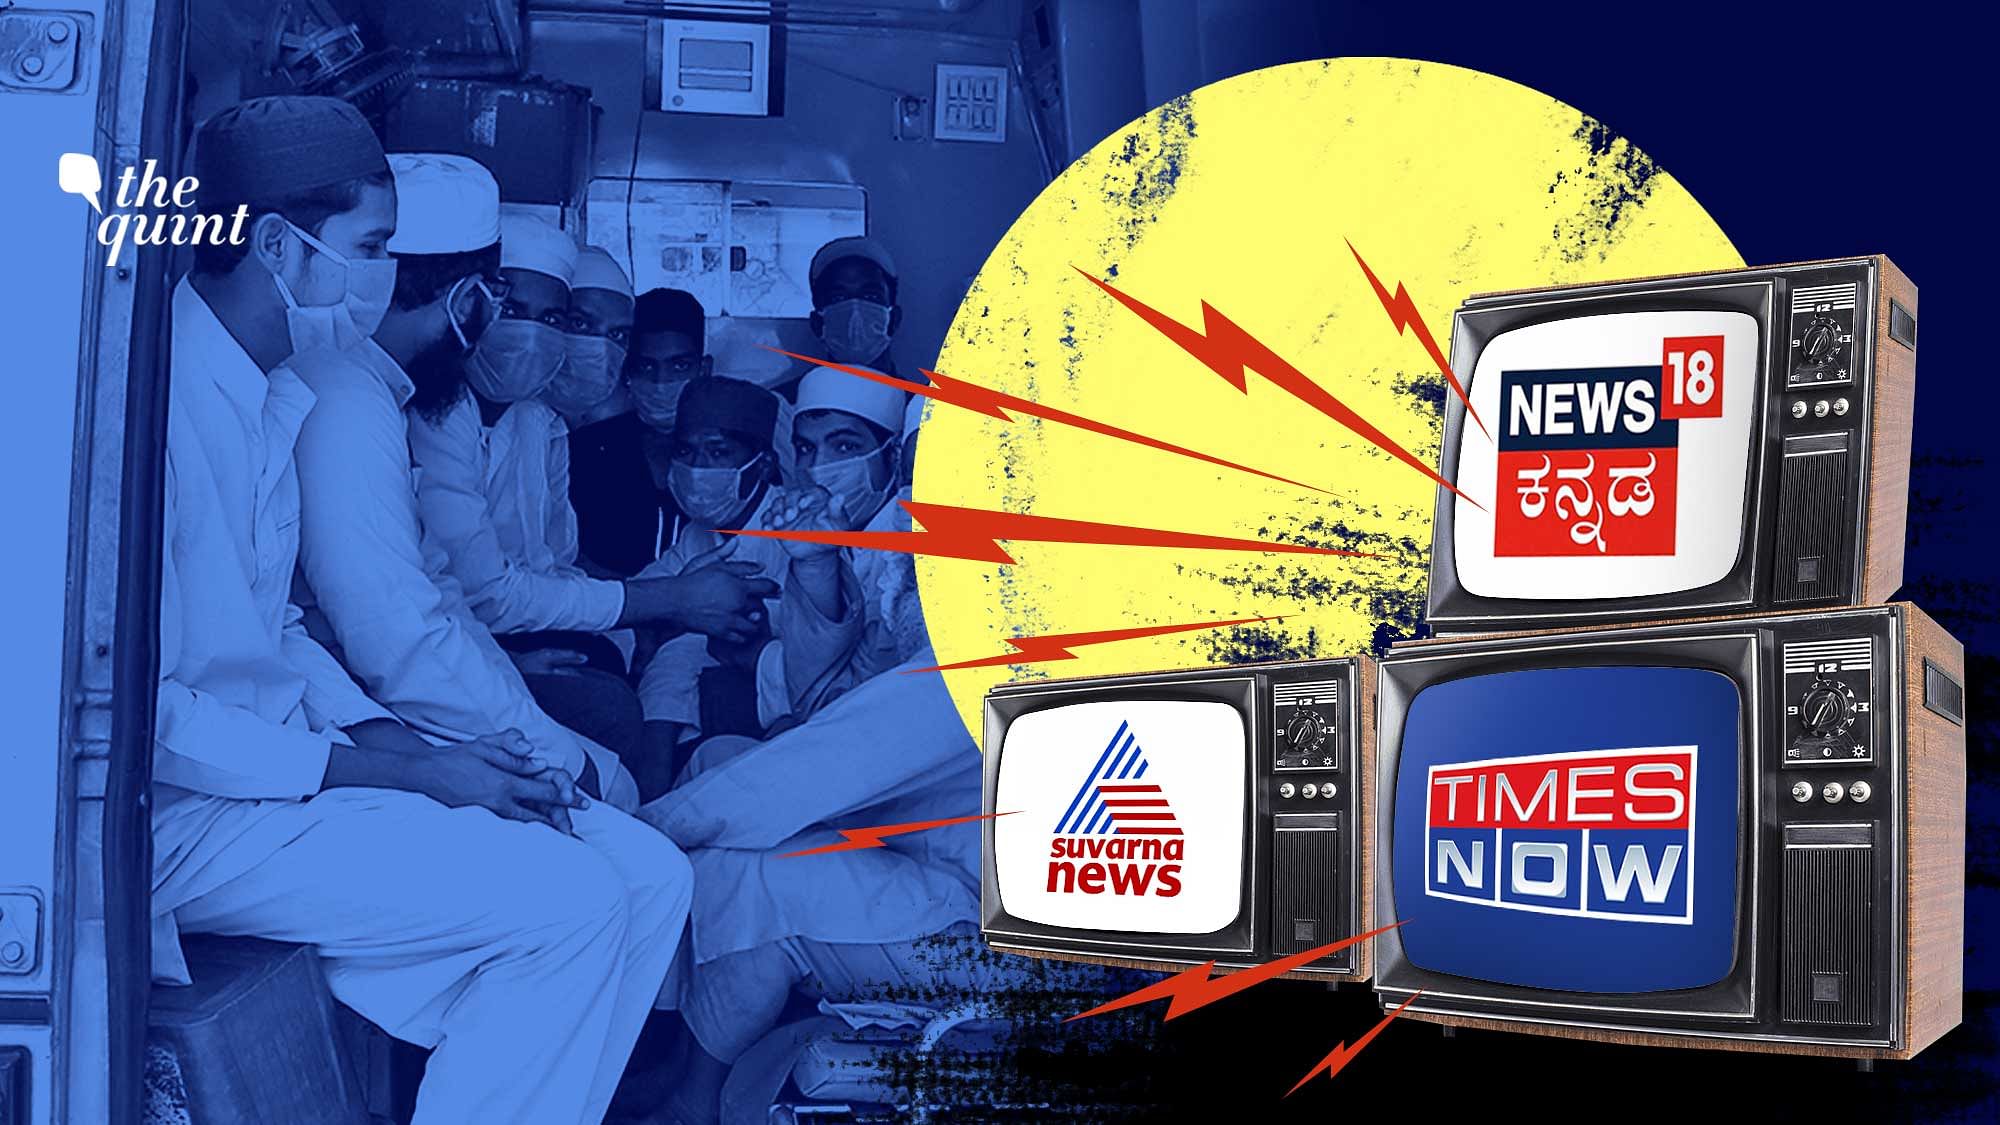 News 18 Kannada had to air an apology after it was found to have aired hate speech targeting Tablighi Jamaat. NBSA has rapped Times Now and Suvarna News too.